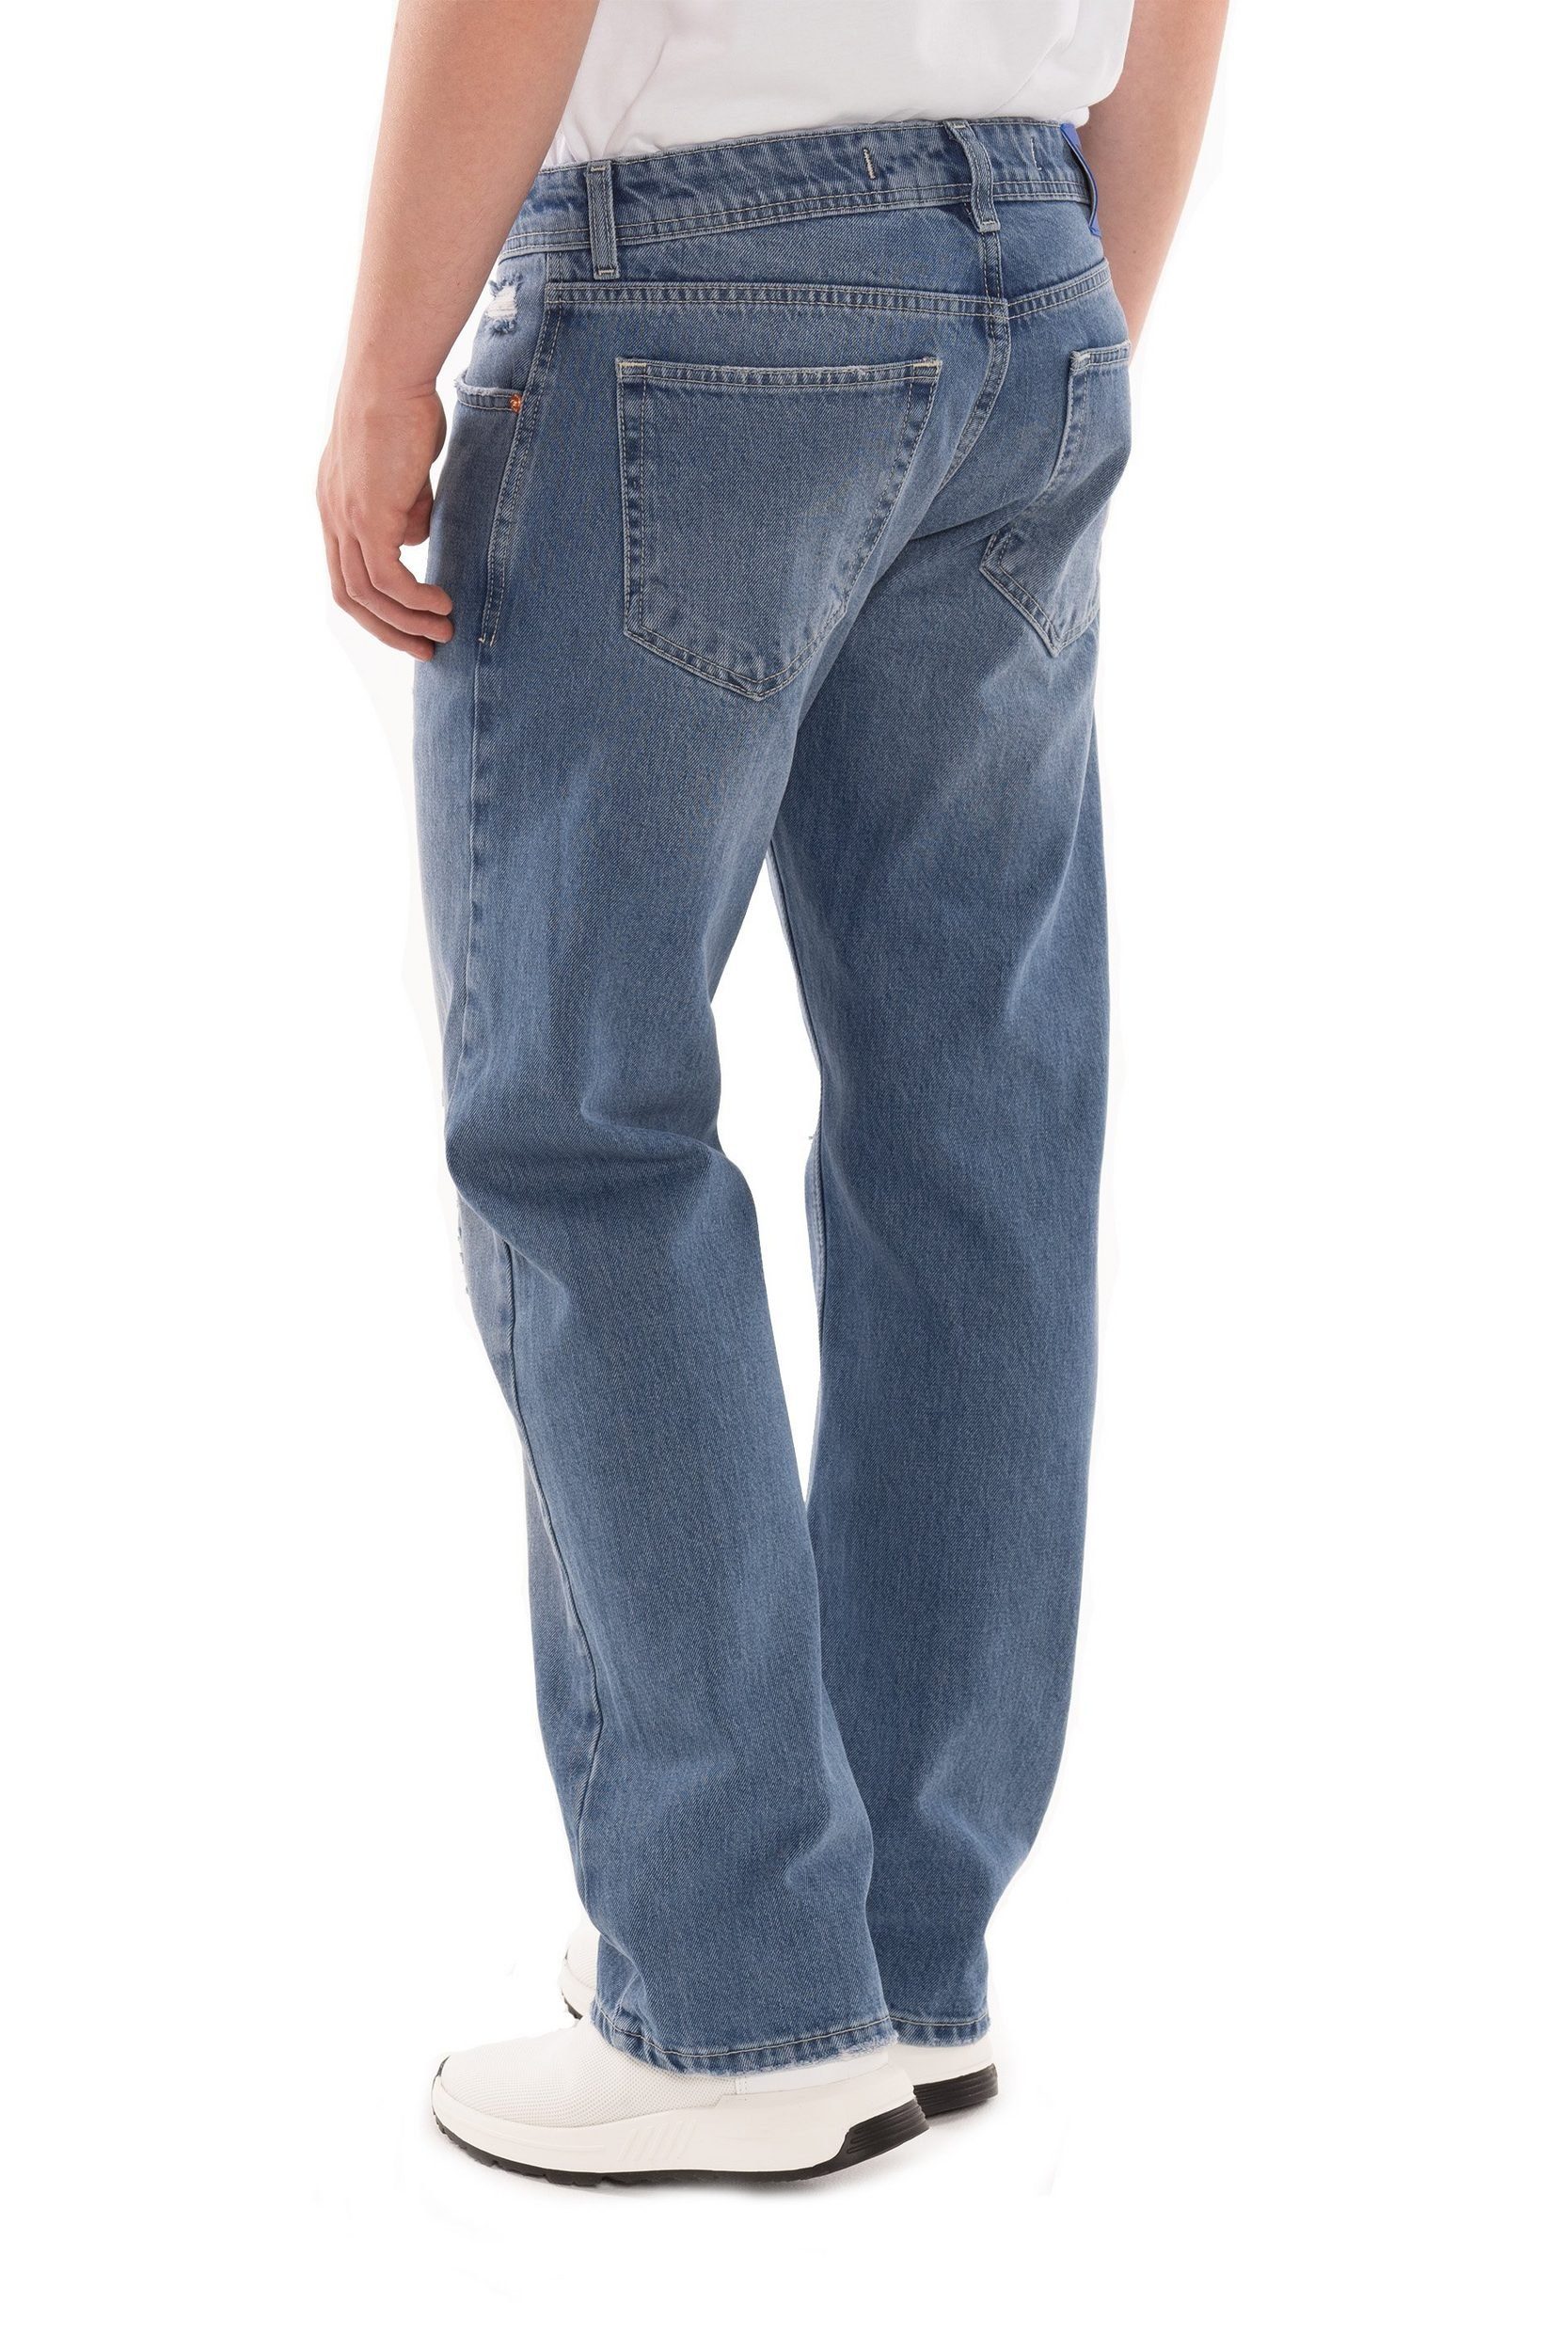 PICALDI Jeans Straight-Jeans 965 5-Pocket-Style IOLA